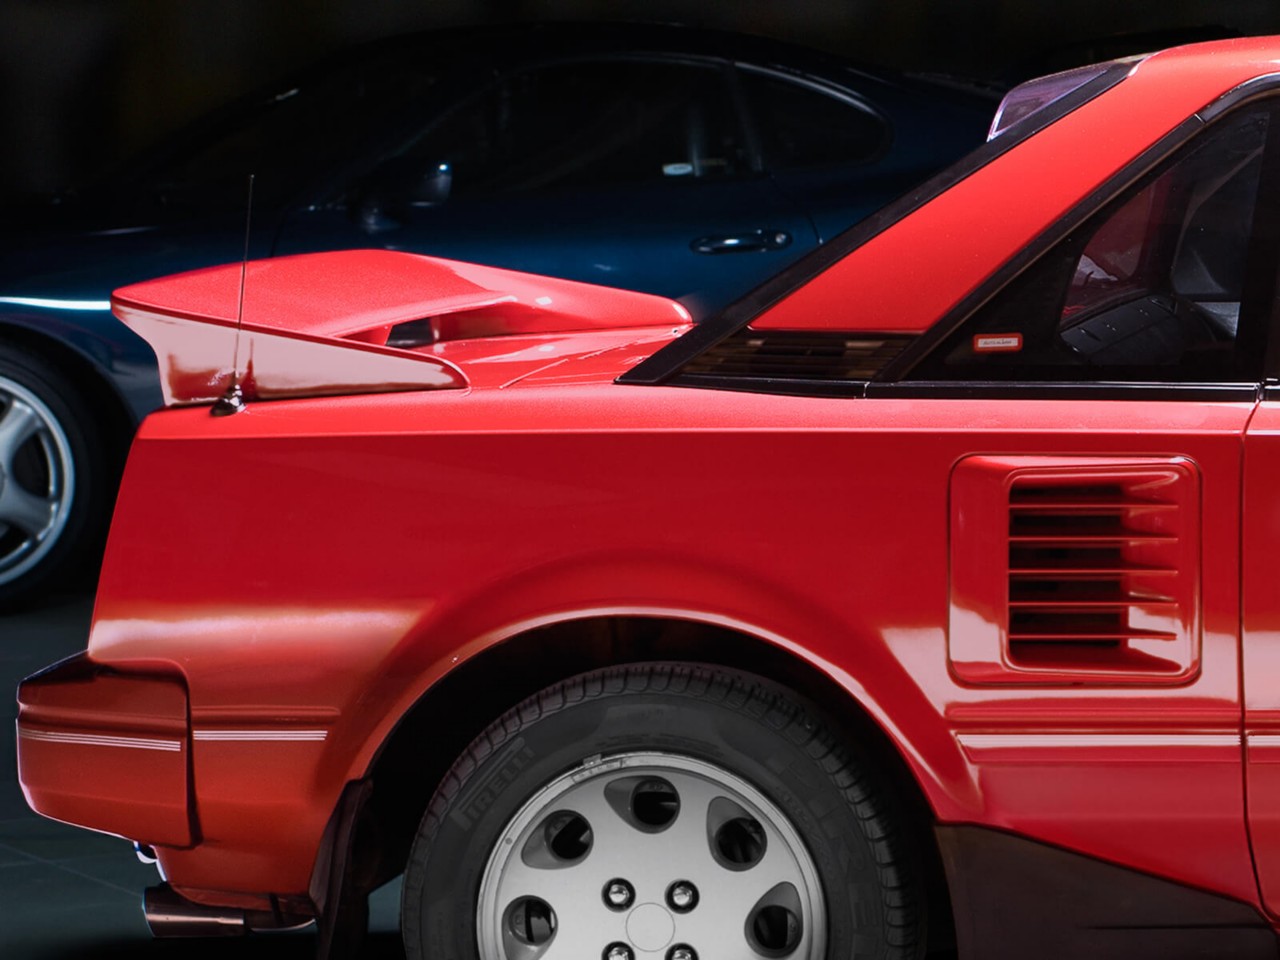 Toyota MR2 Sports car close up on the back